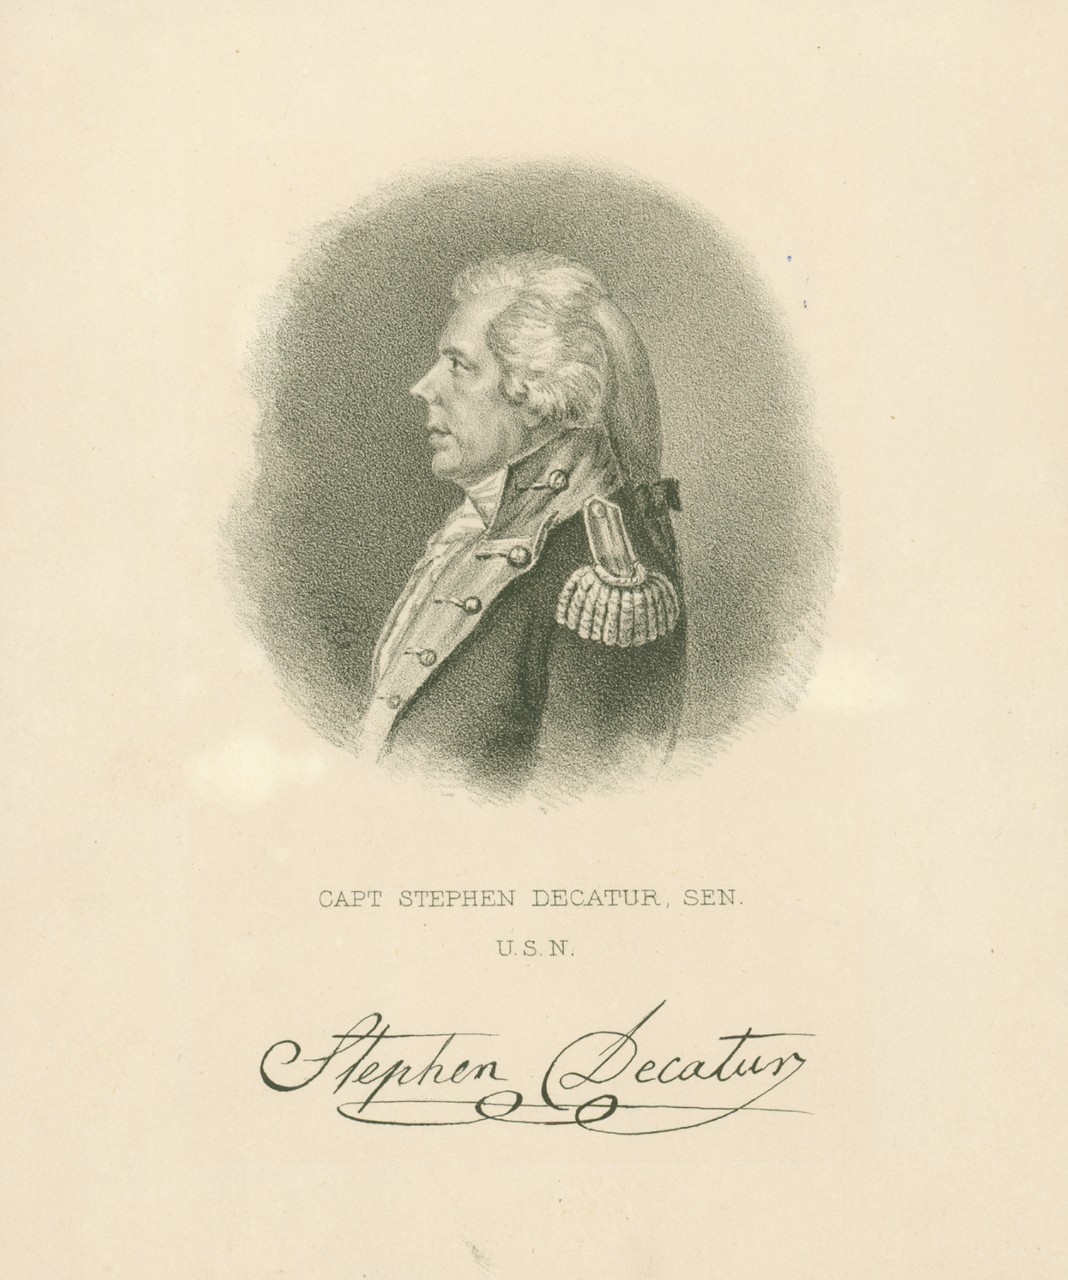 A profile portrait of Stephen Decatur with his signature below